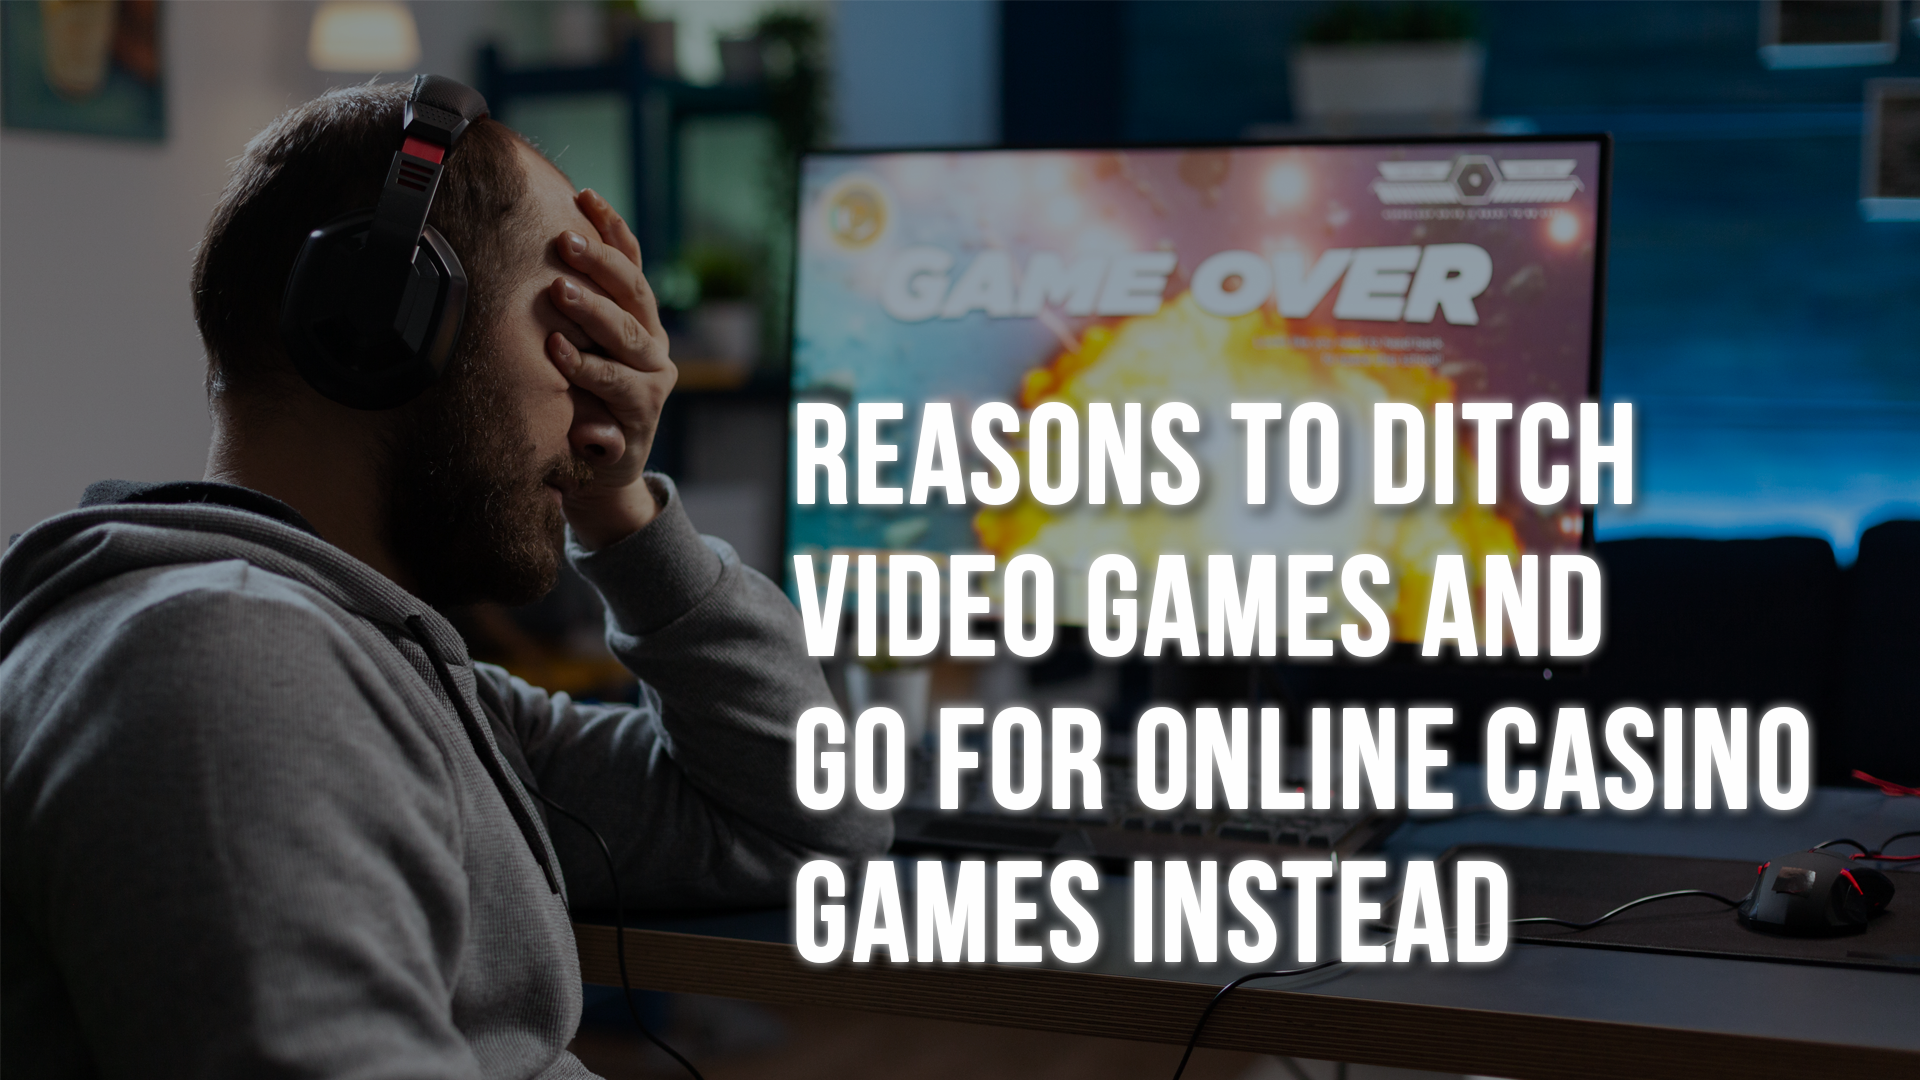 Reasons To Ditch Video Games And Go For Online Casino Games Instead